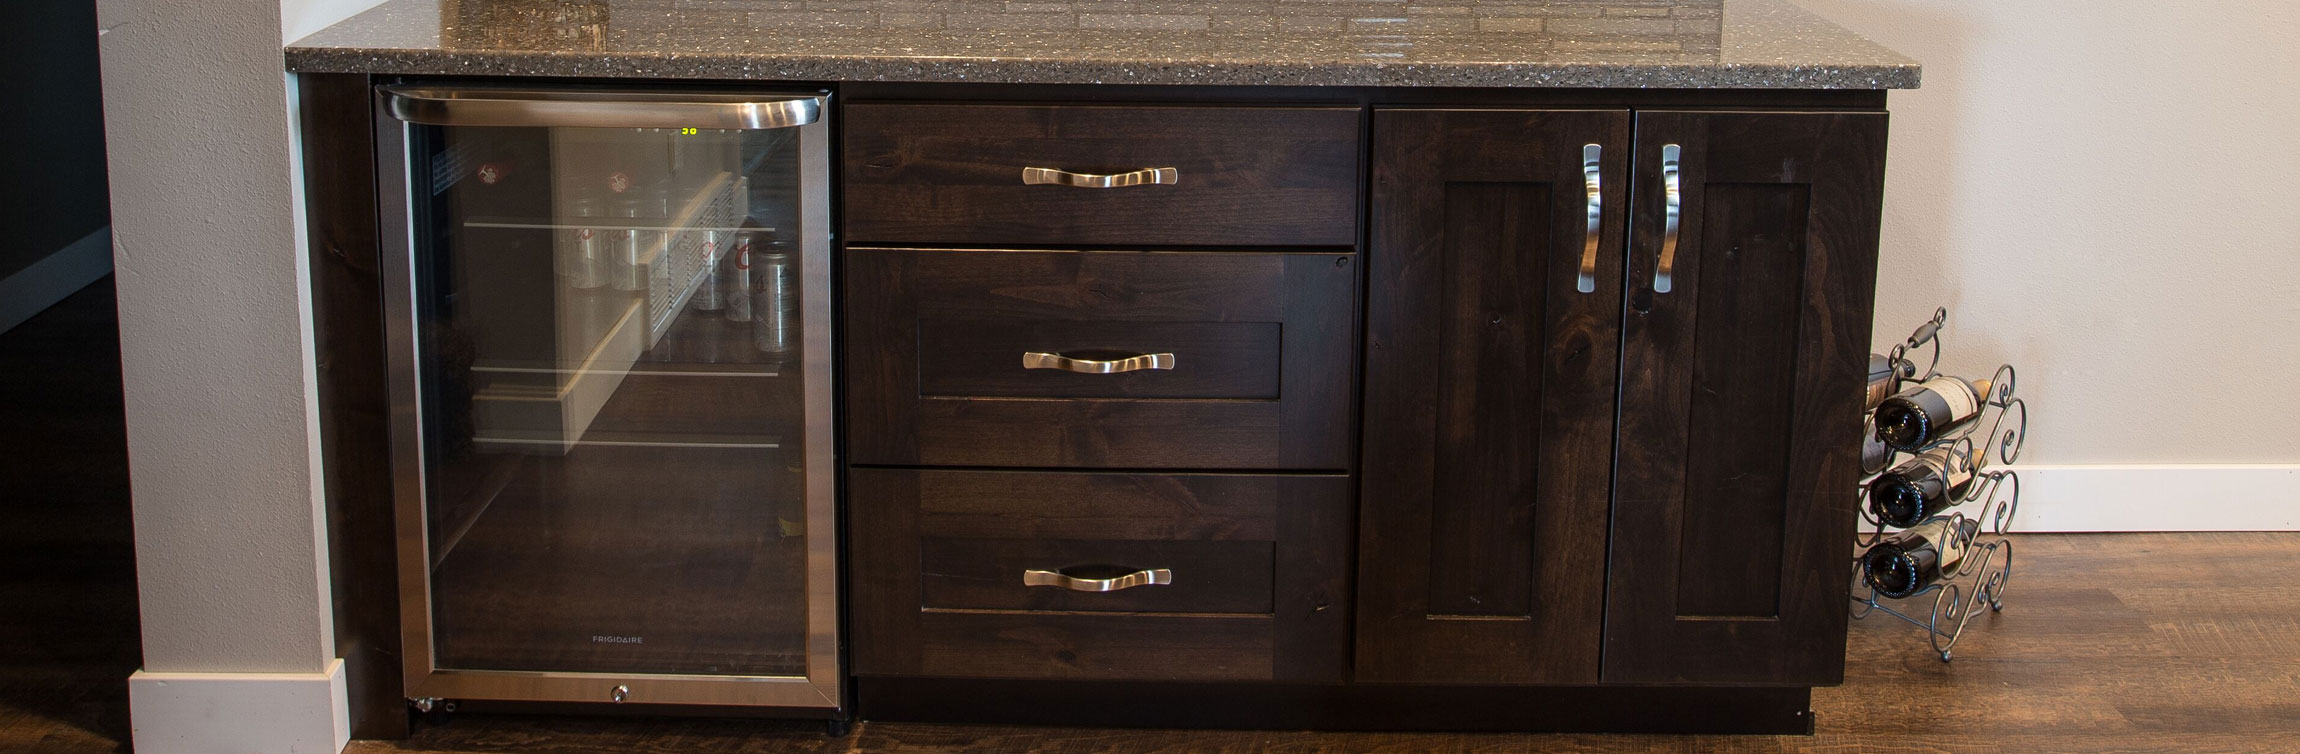 Custom built-in mini bar with espresso colored cabinets, stone countertop, and wine cooler